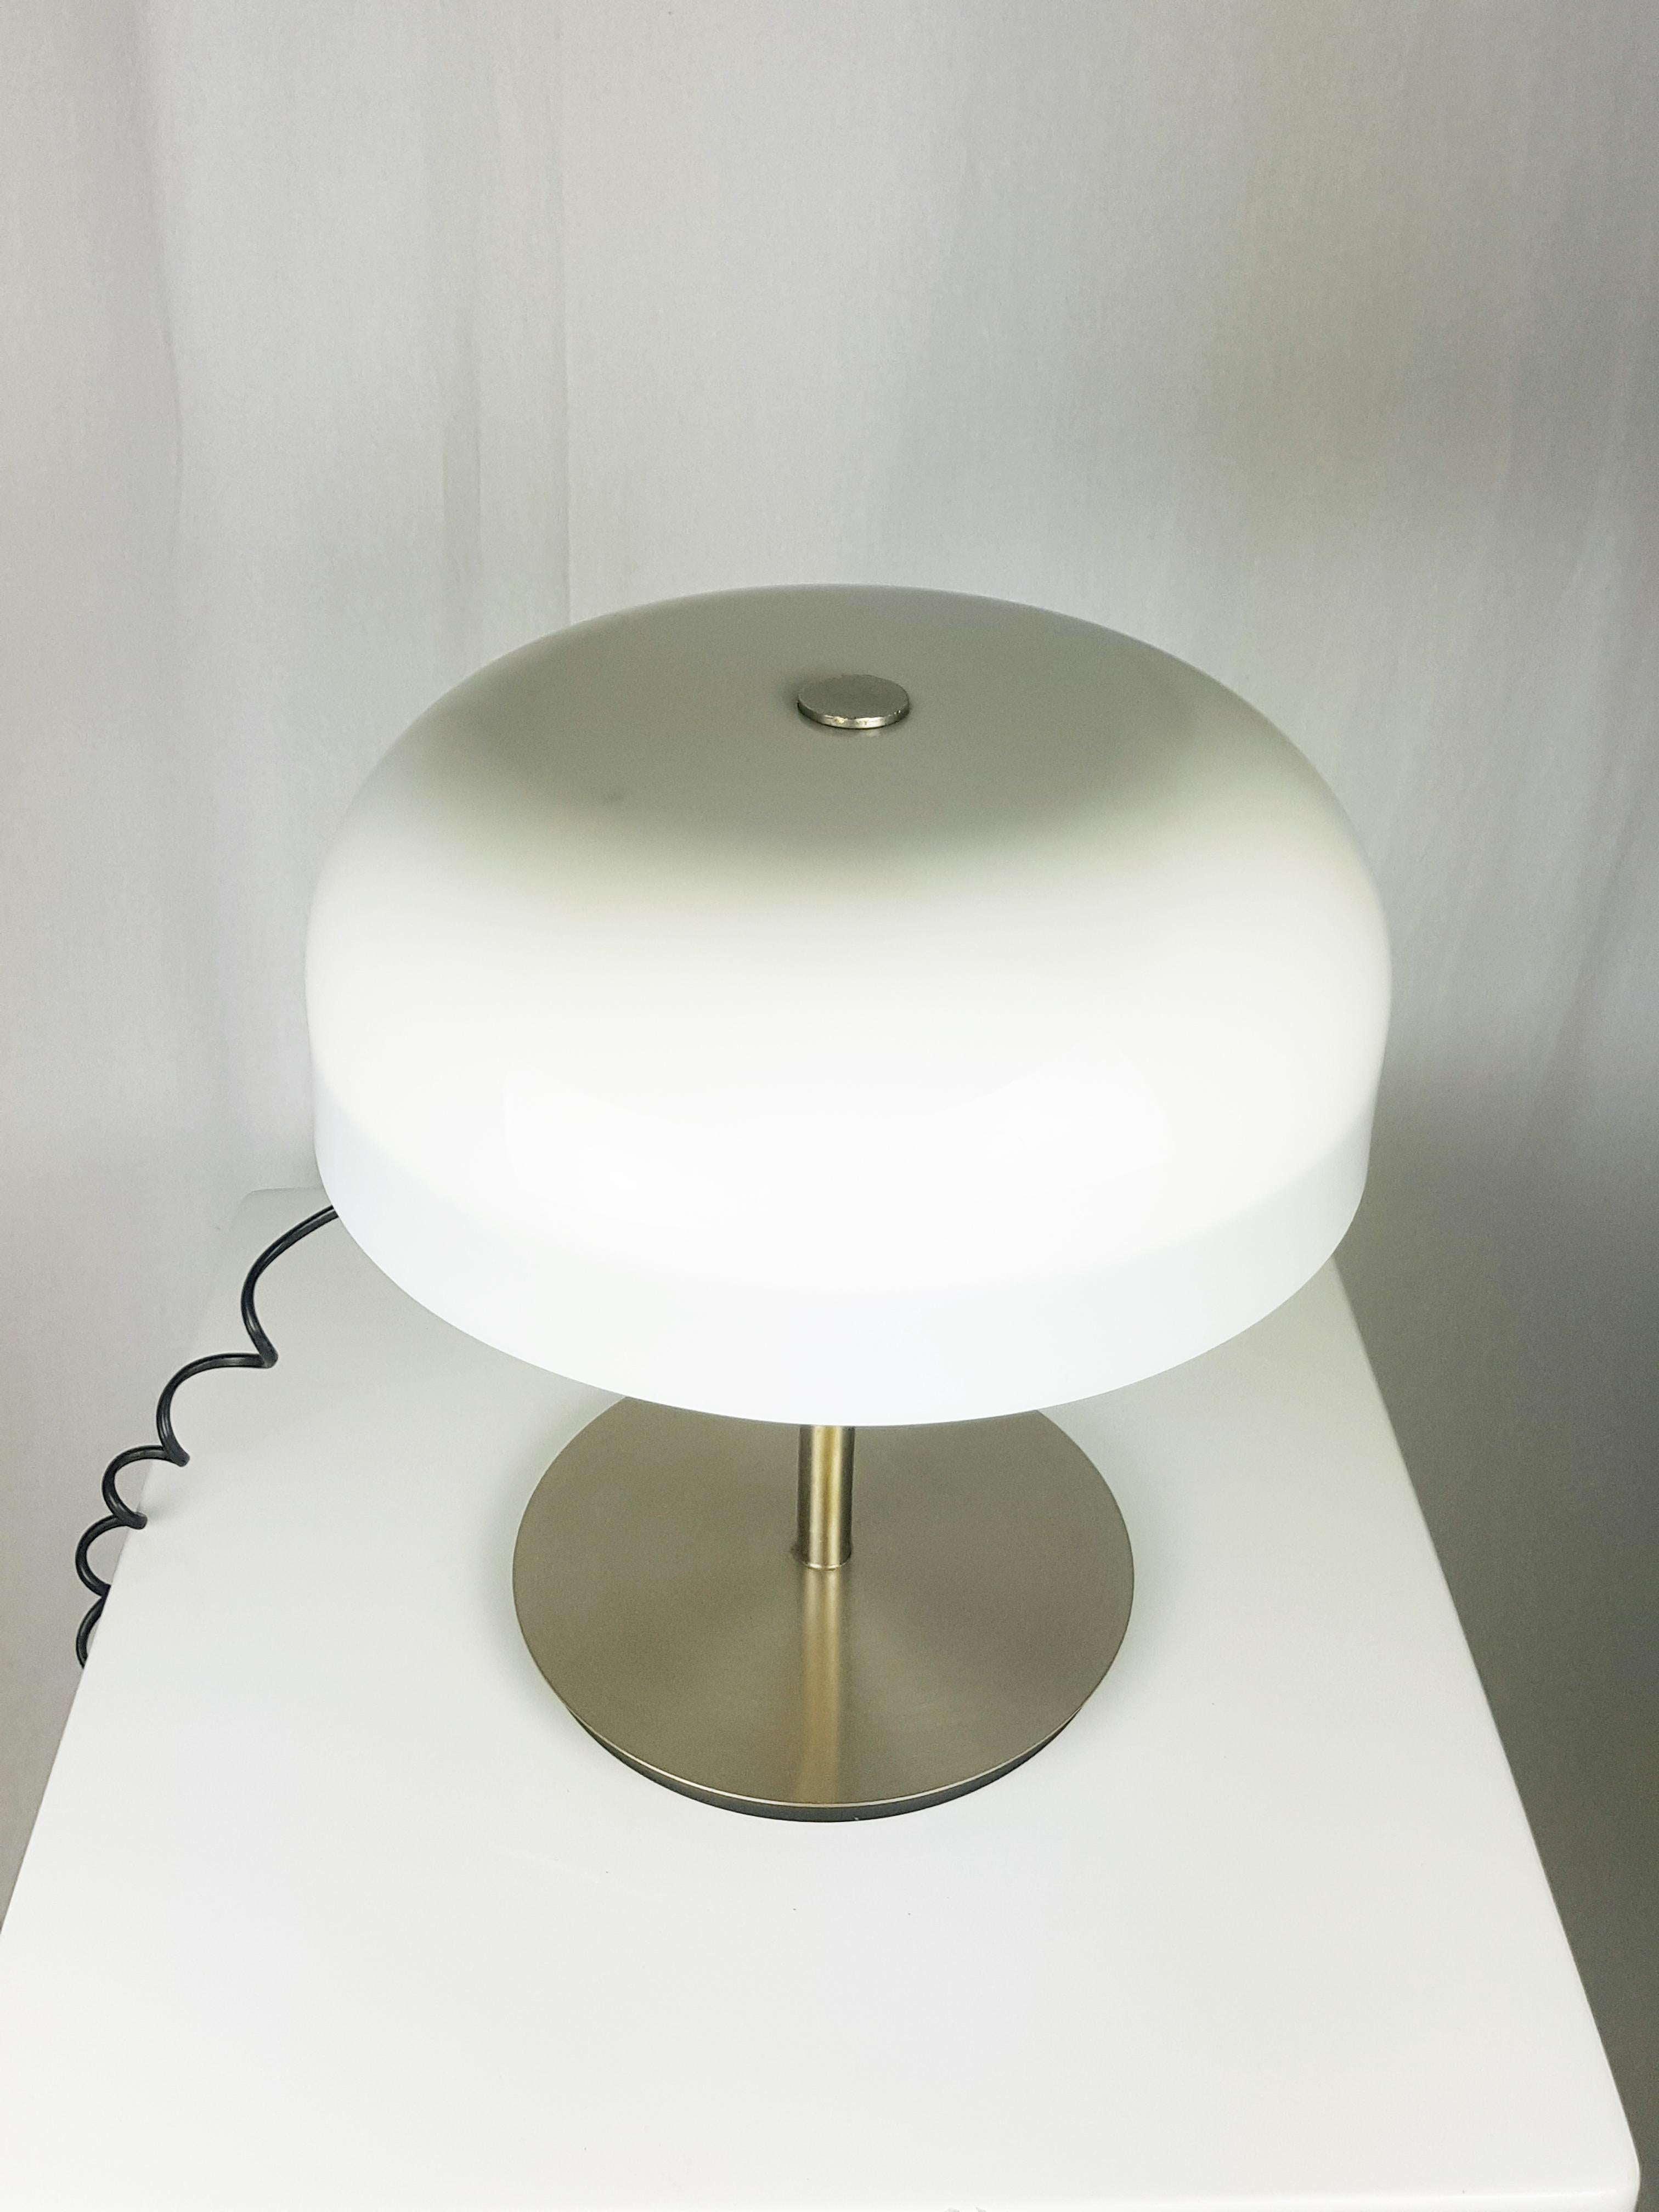 Plastic & Nickel Table Lamp Professional by G. Scolari for Valenti, 1970 For Sale 3